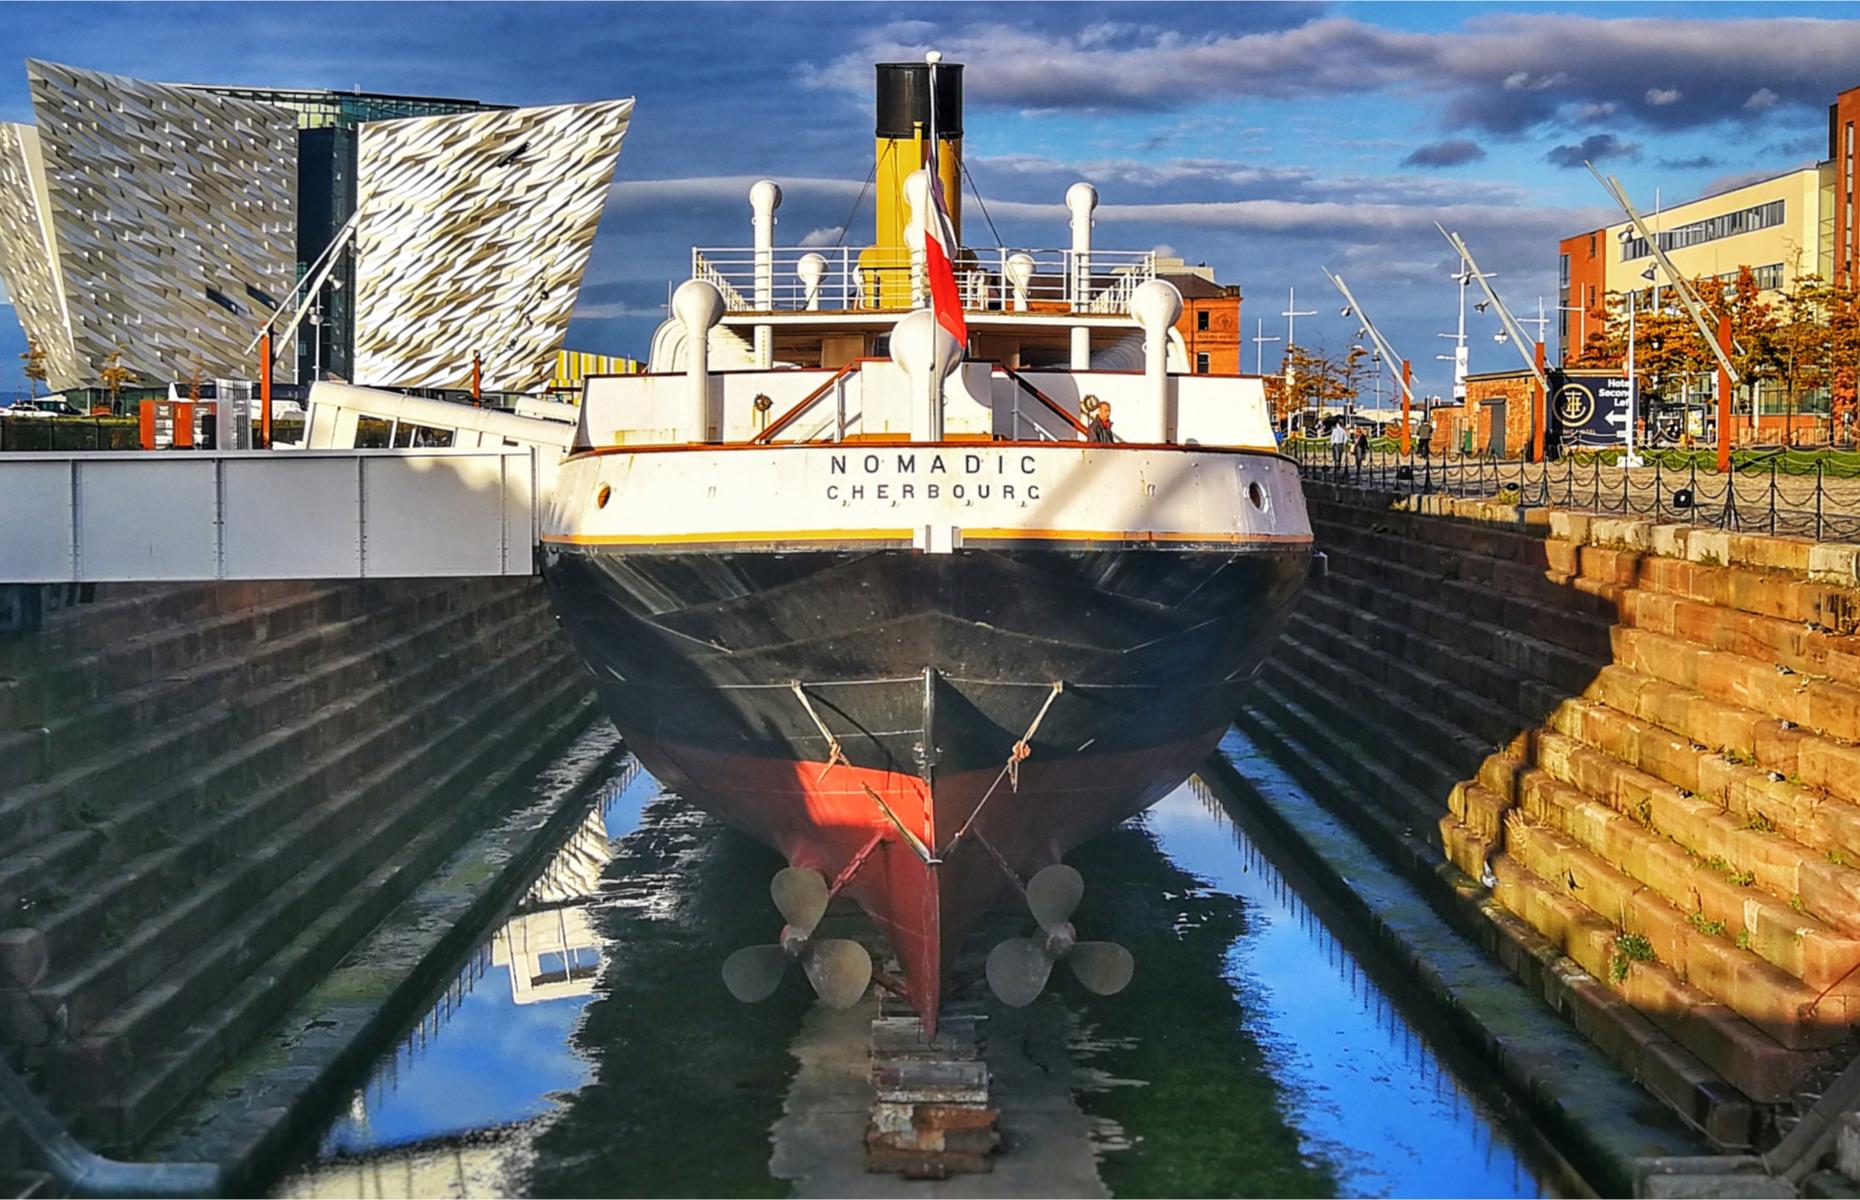 <p>The SS Nomadic, built in 1911 and designed by Titanic architect Thomas Andrews, is the only White Star Line ship still in existence. Her function was as a tender, to transport passengers onto the Titanic and her sister ship RMS Olympic at Cherbourg, France, where the harbour was too small for the liners to dock. The Nomadic would have transported the Astors and fellow American businessman Benjamin Guggenheim, among other first and second class passengers, out to the Titanic. Saved from the scrapheap, <a href="https://www.titanicbelfast.com/explore/ss-nomadic/">the Nomadic is now back in Belfast's historic Hamilton Dock</a> and can be boarded as part of the Titanic Experience.</p>